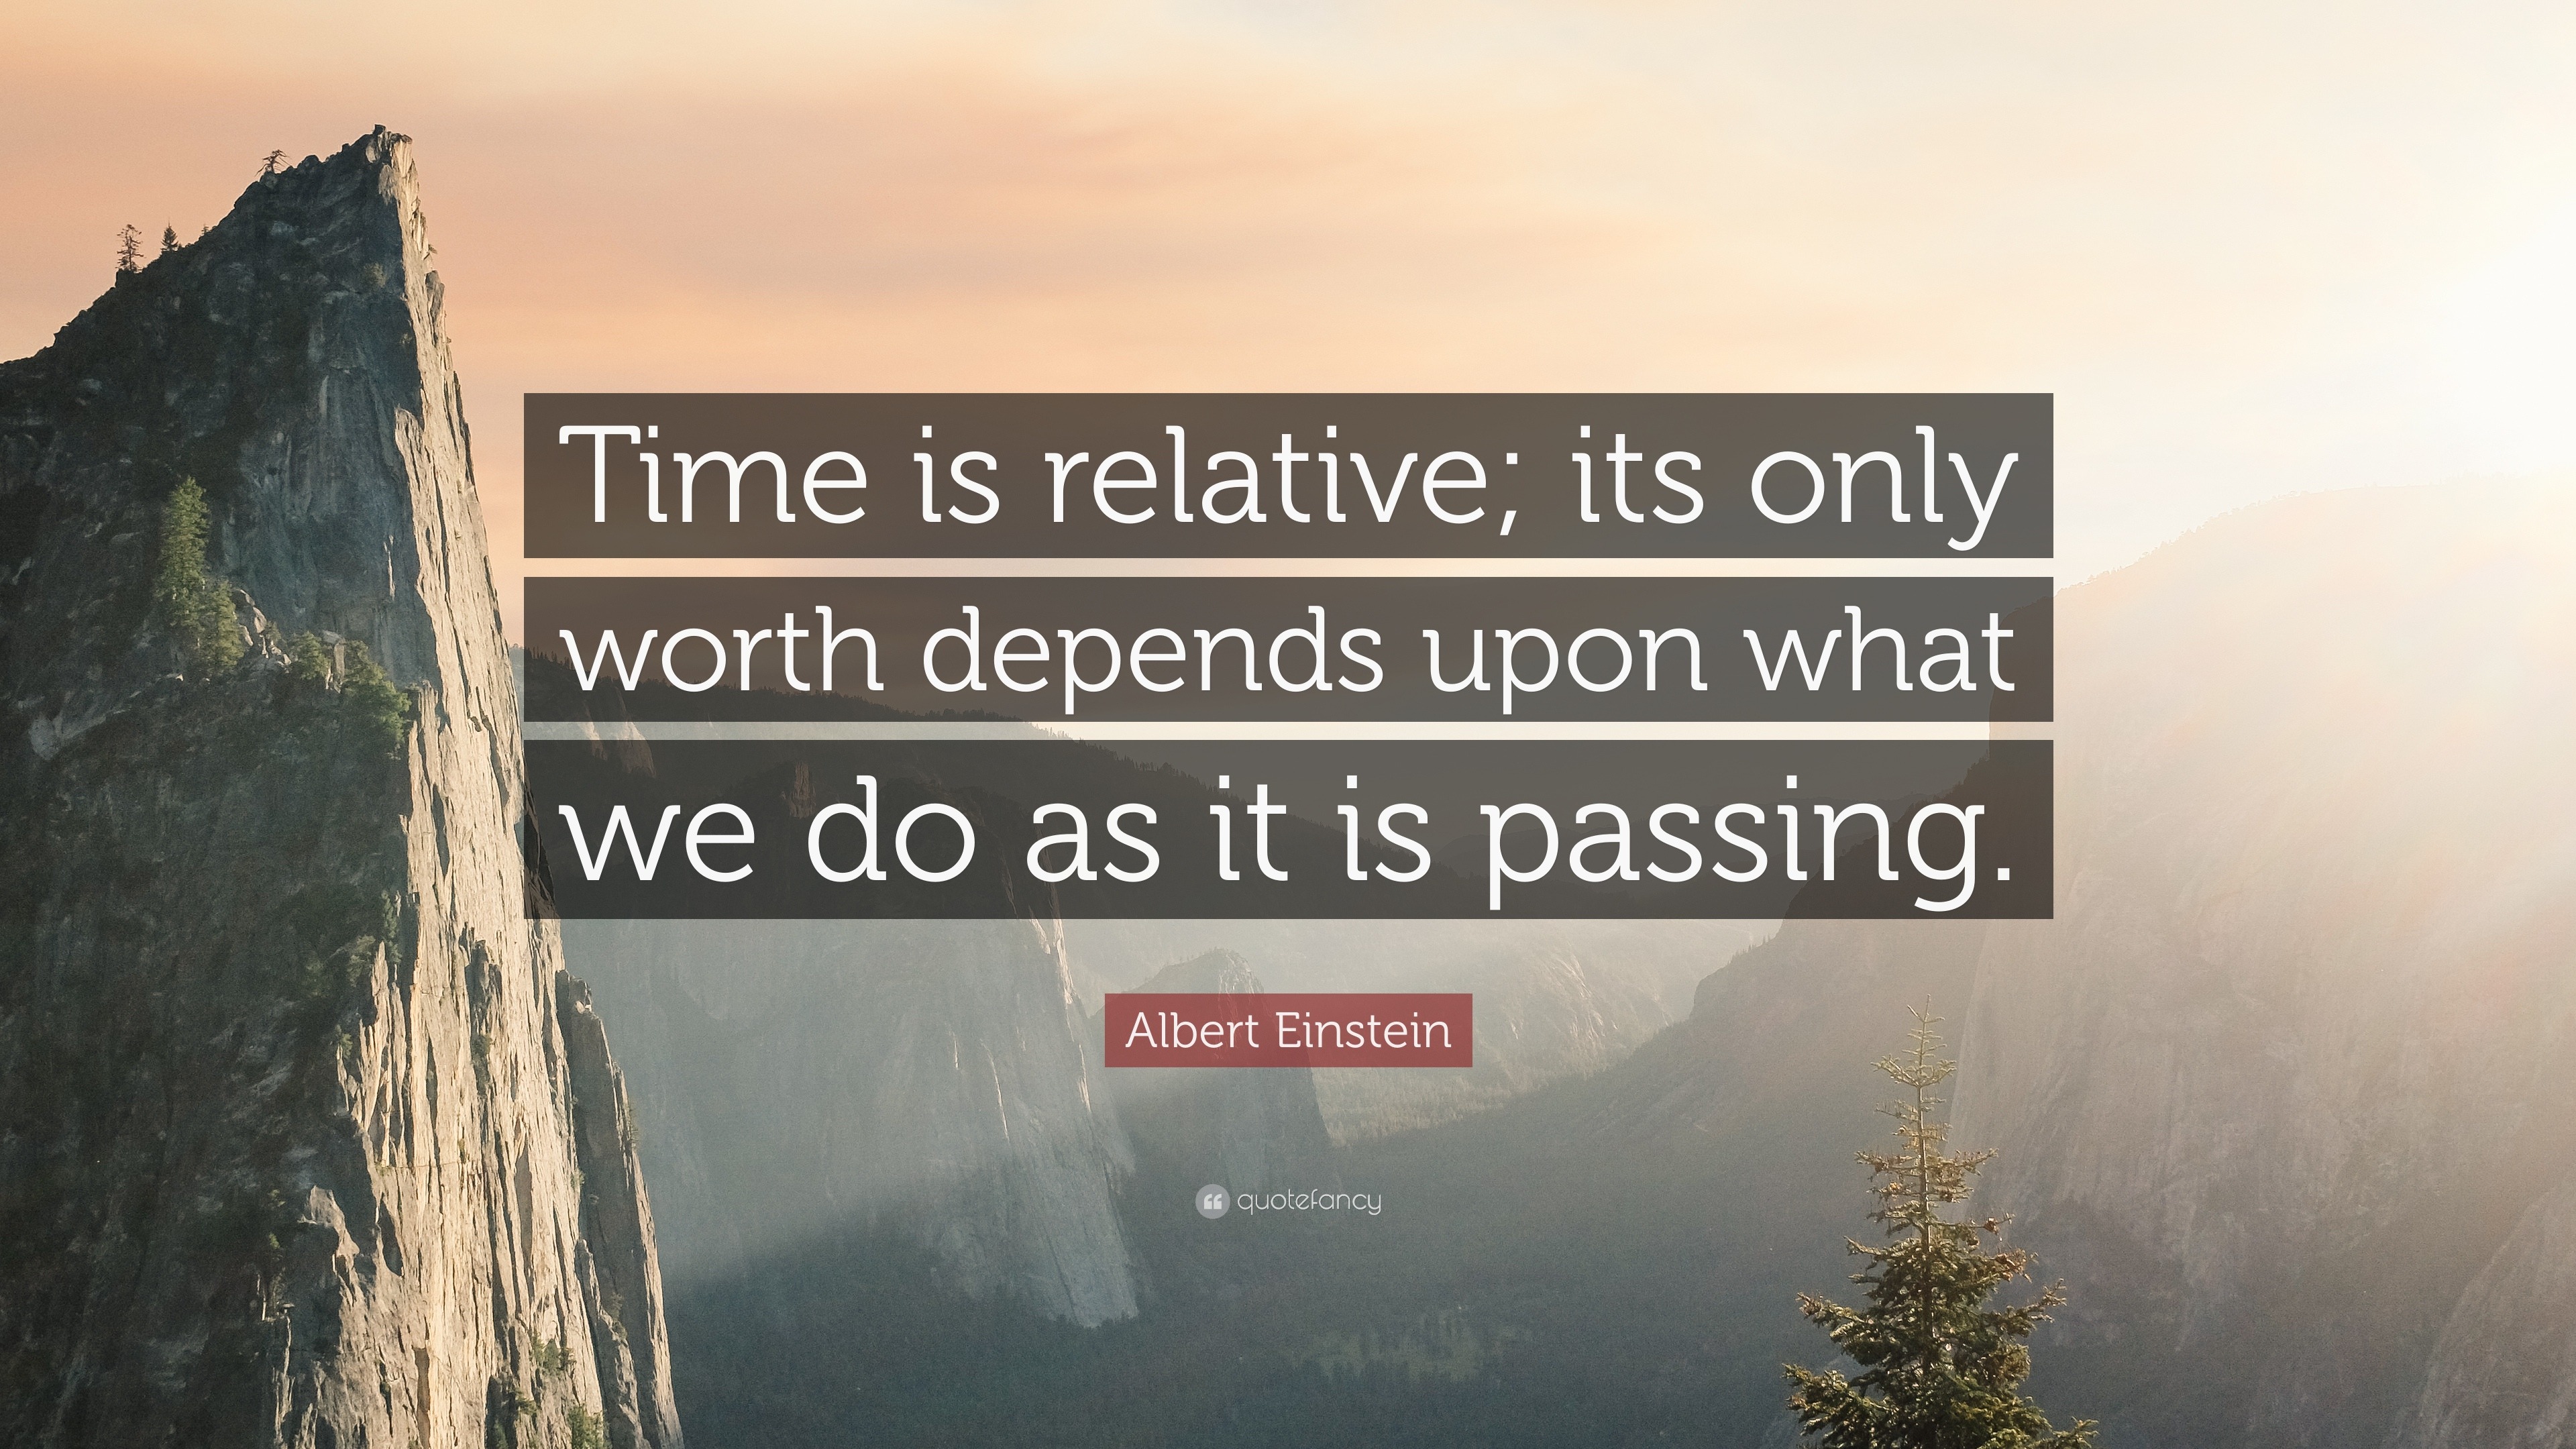 Albert Einstein Quote Time Is Relative Its Only Worth Depends Upon What We Do As It